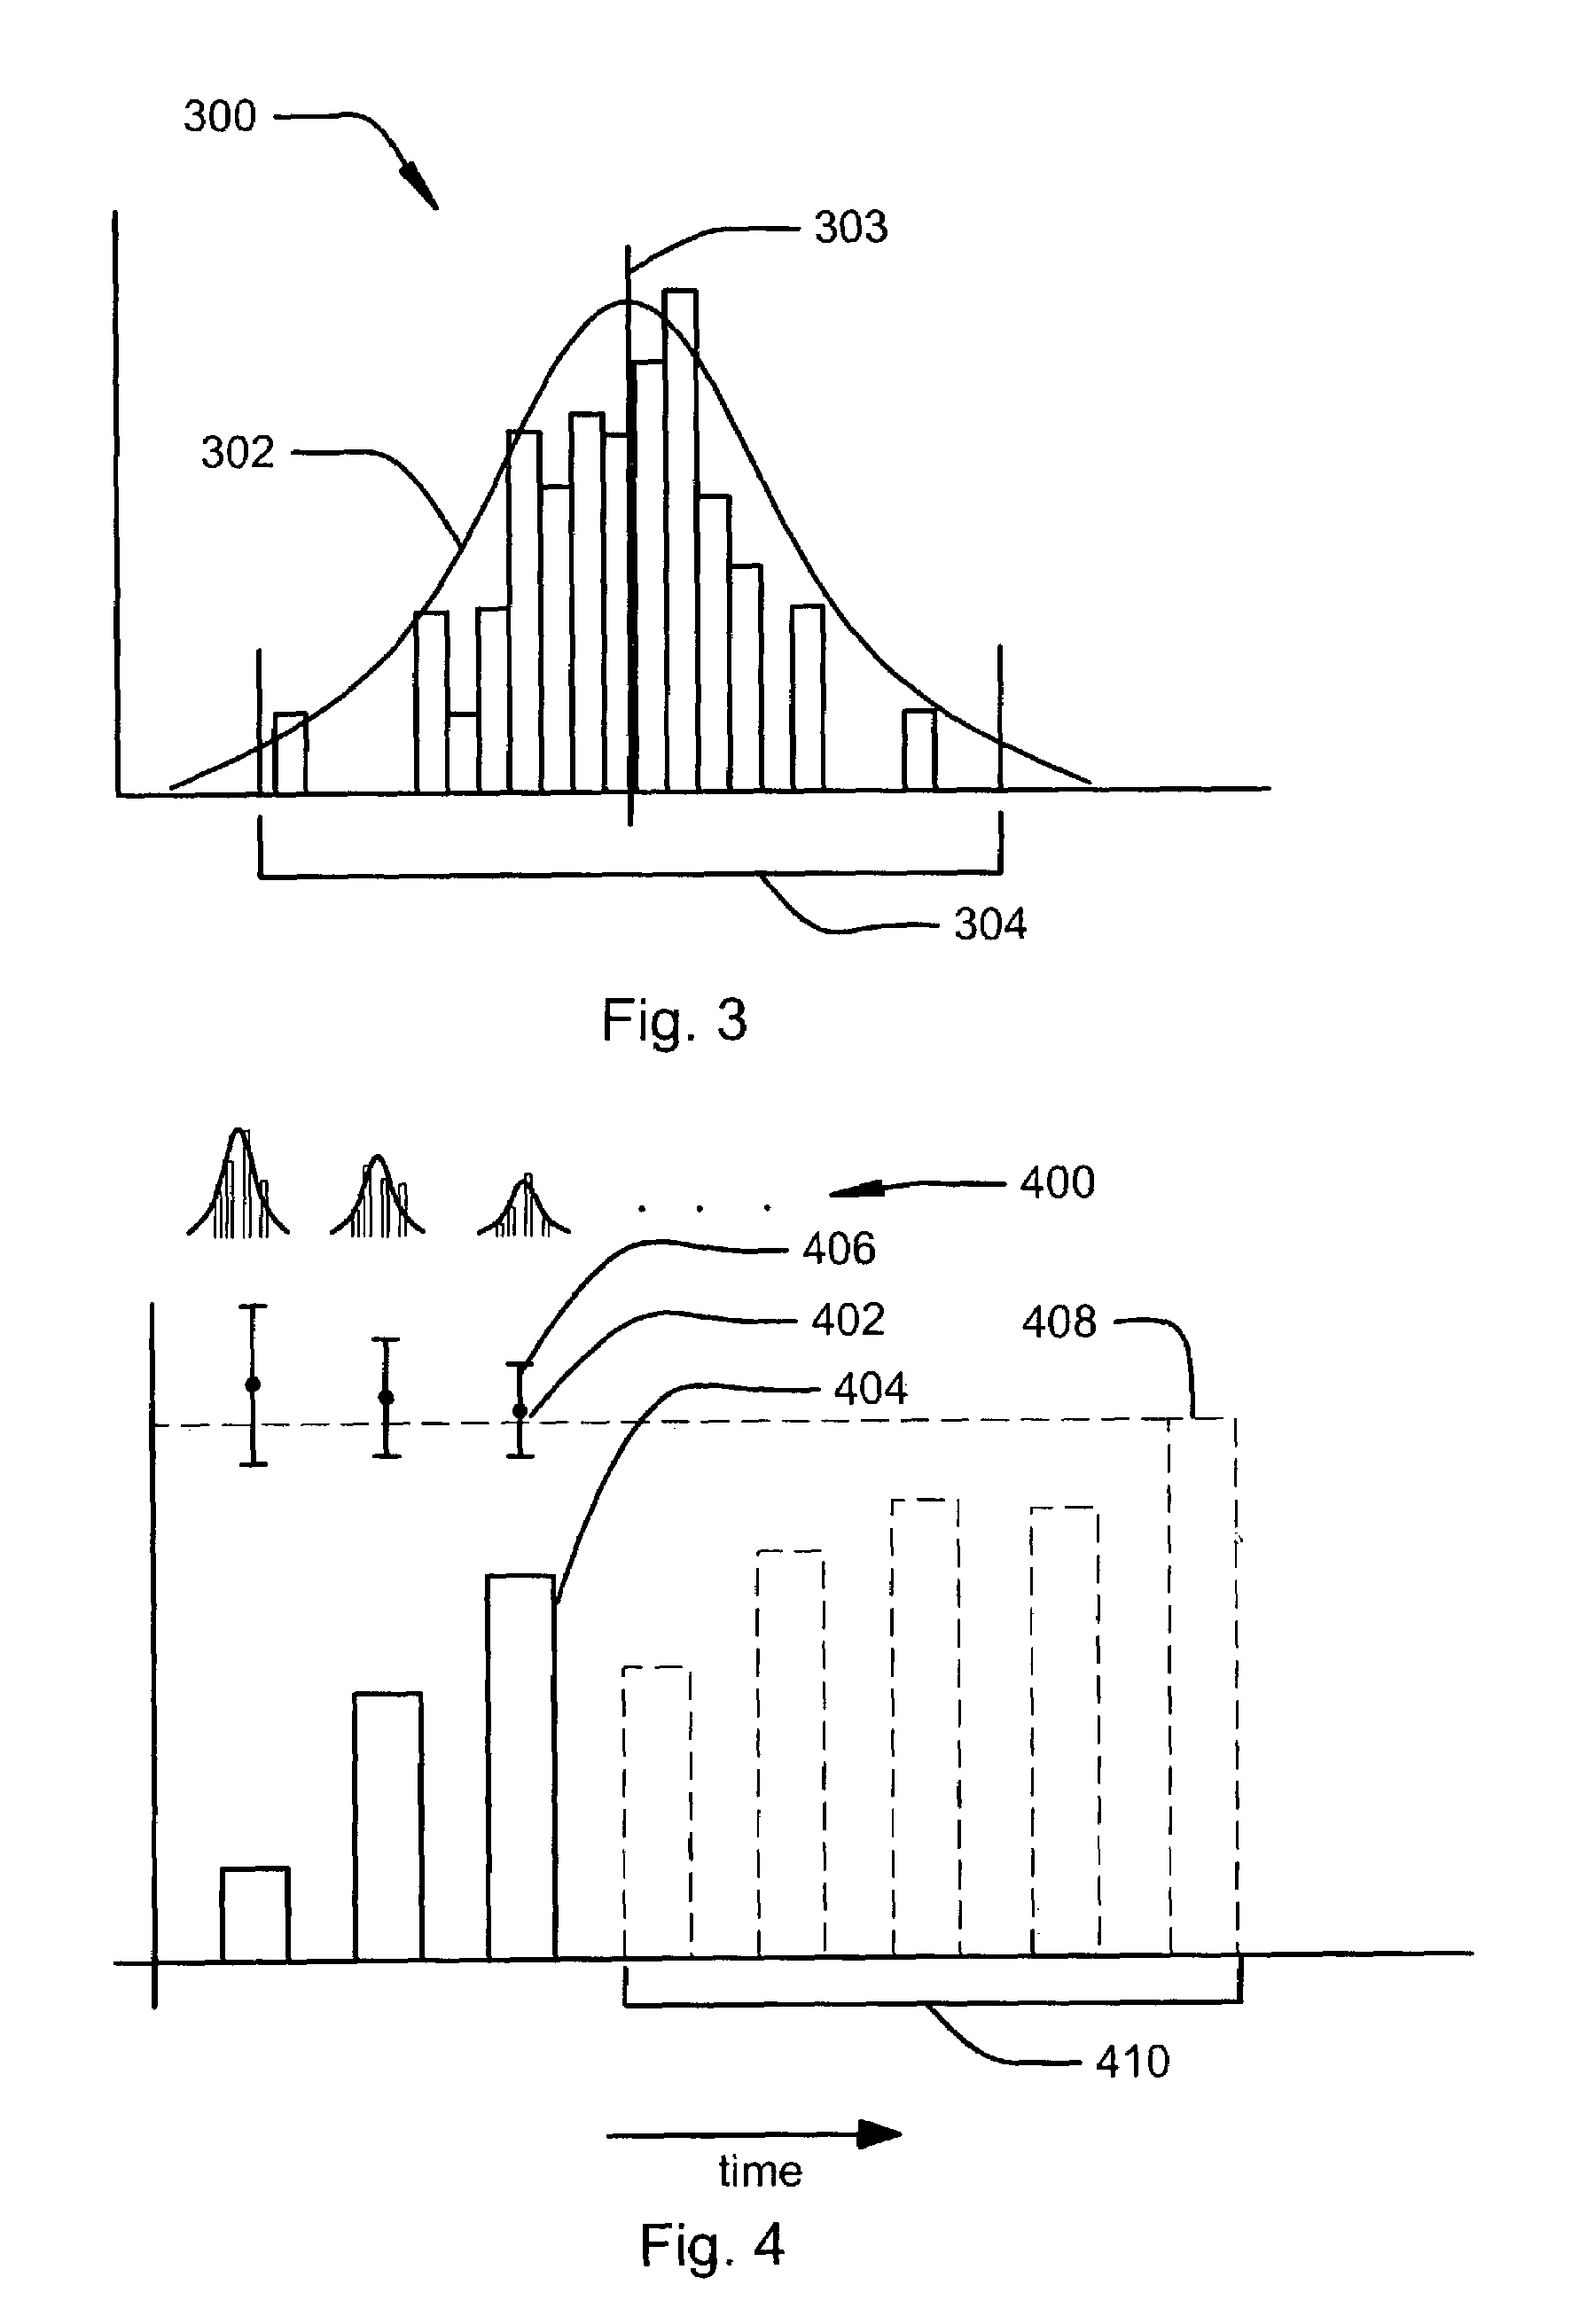 Method and system for constructing prediction interval based on historical forecast errors